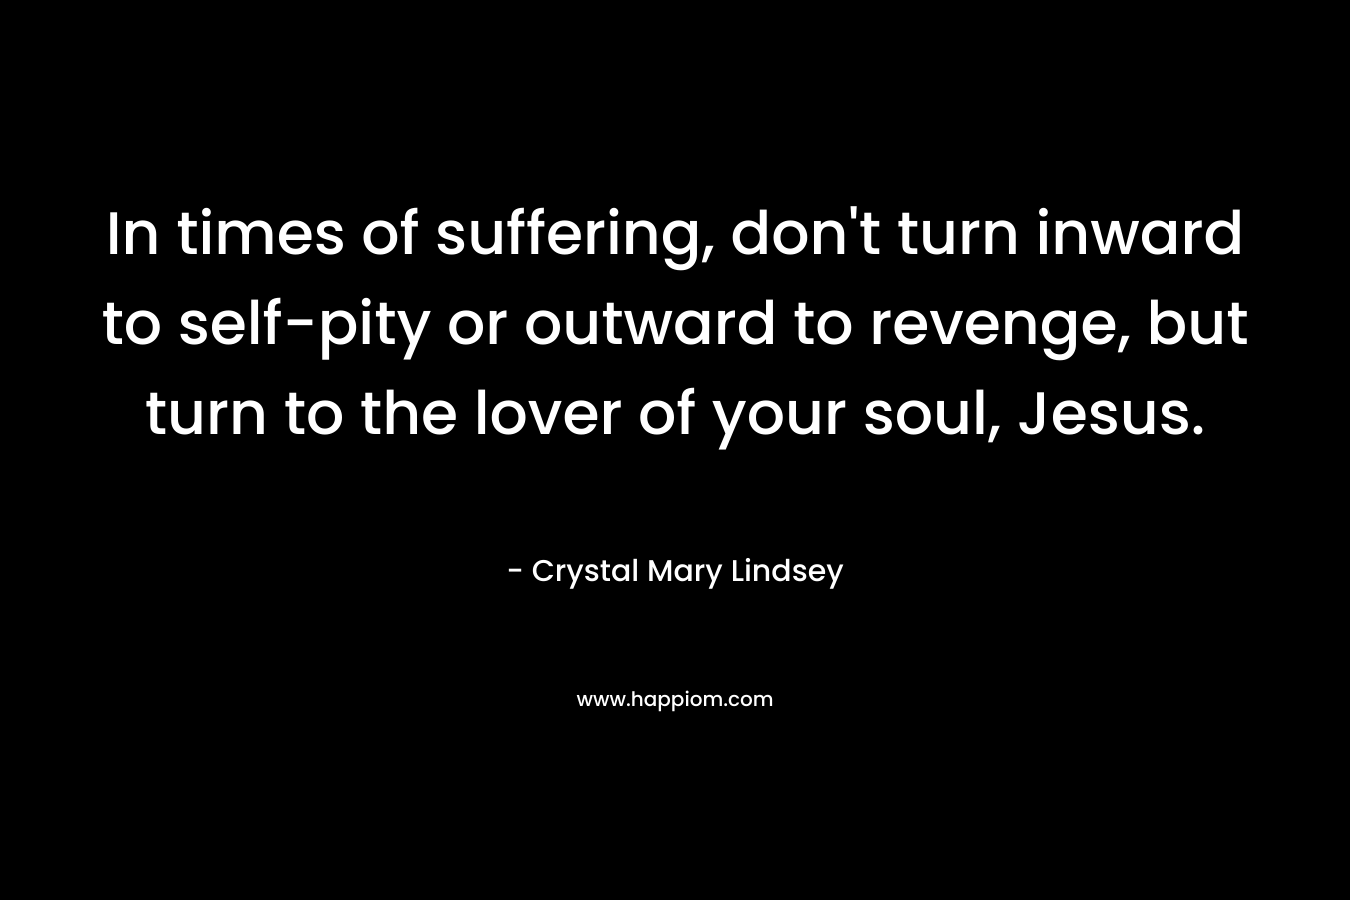 In times of suffering, don’t turn inward to self-pity or outward to revenge, but turn to the lover of your soul, Jesus. – Crystal Mary Lindsey